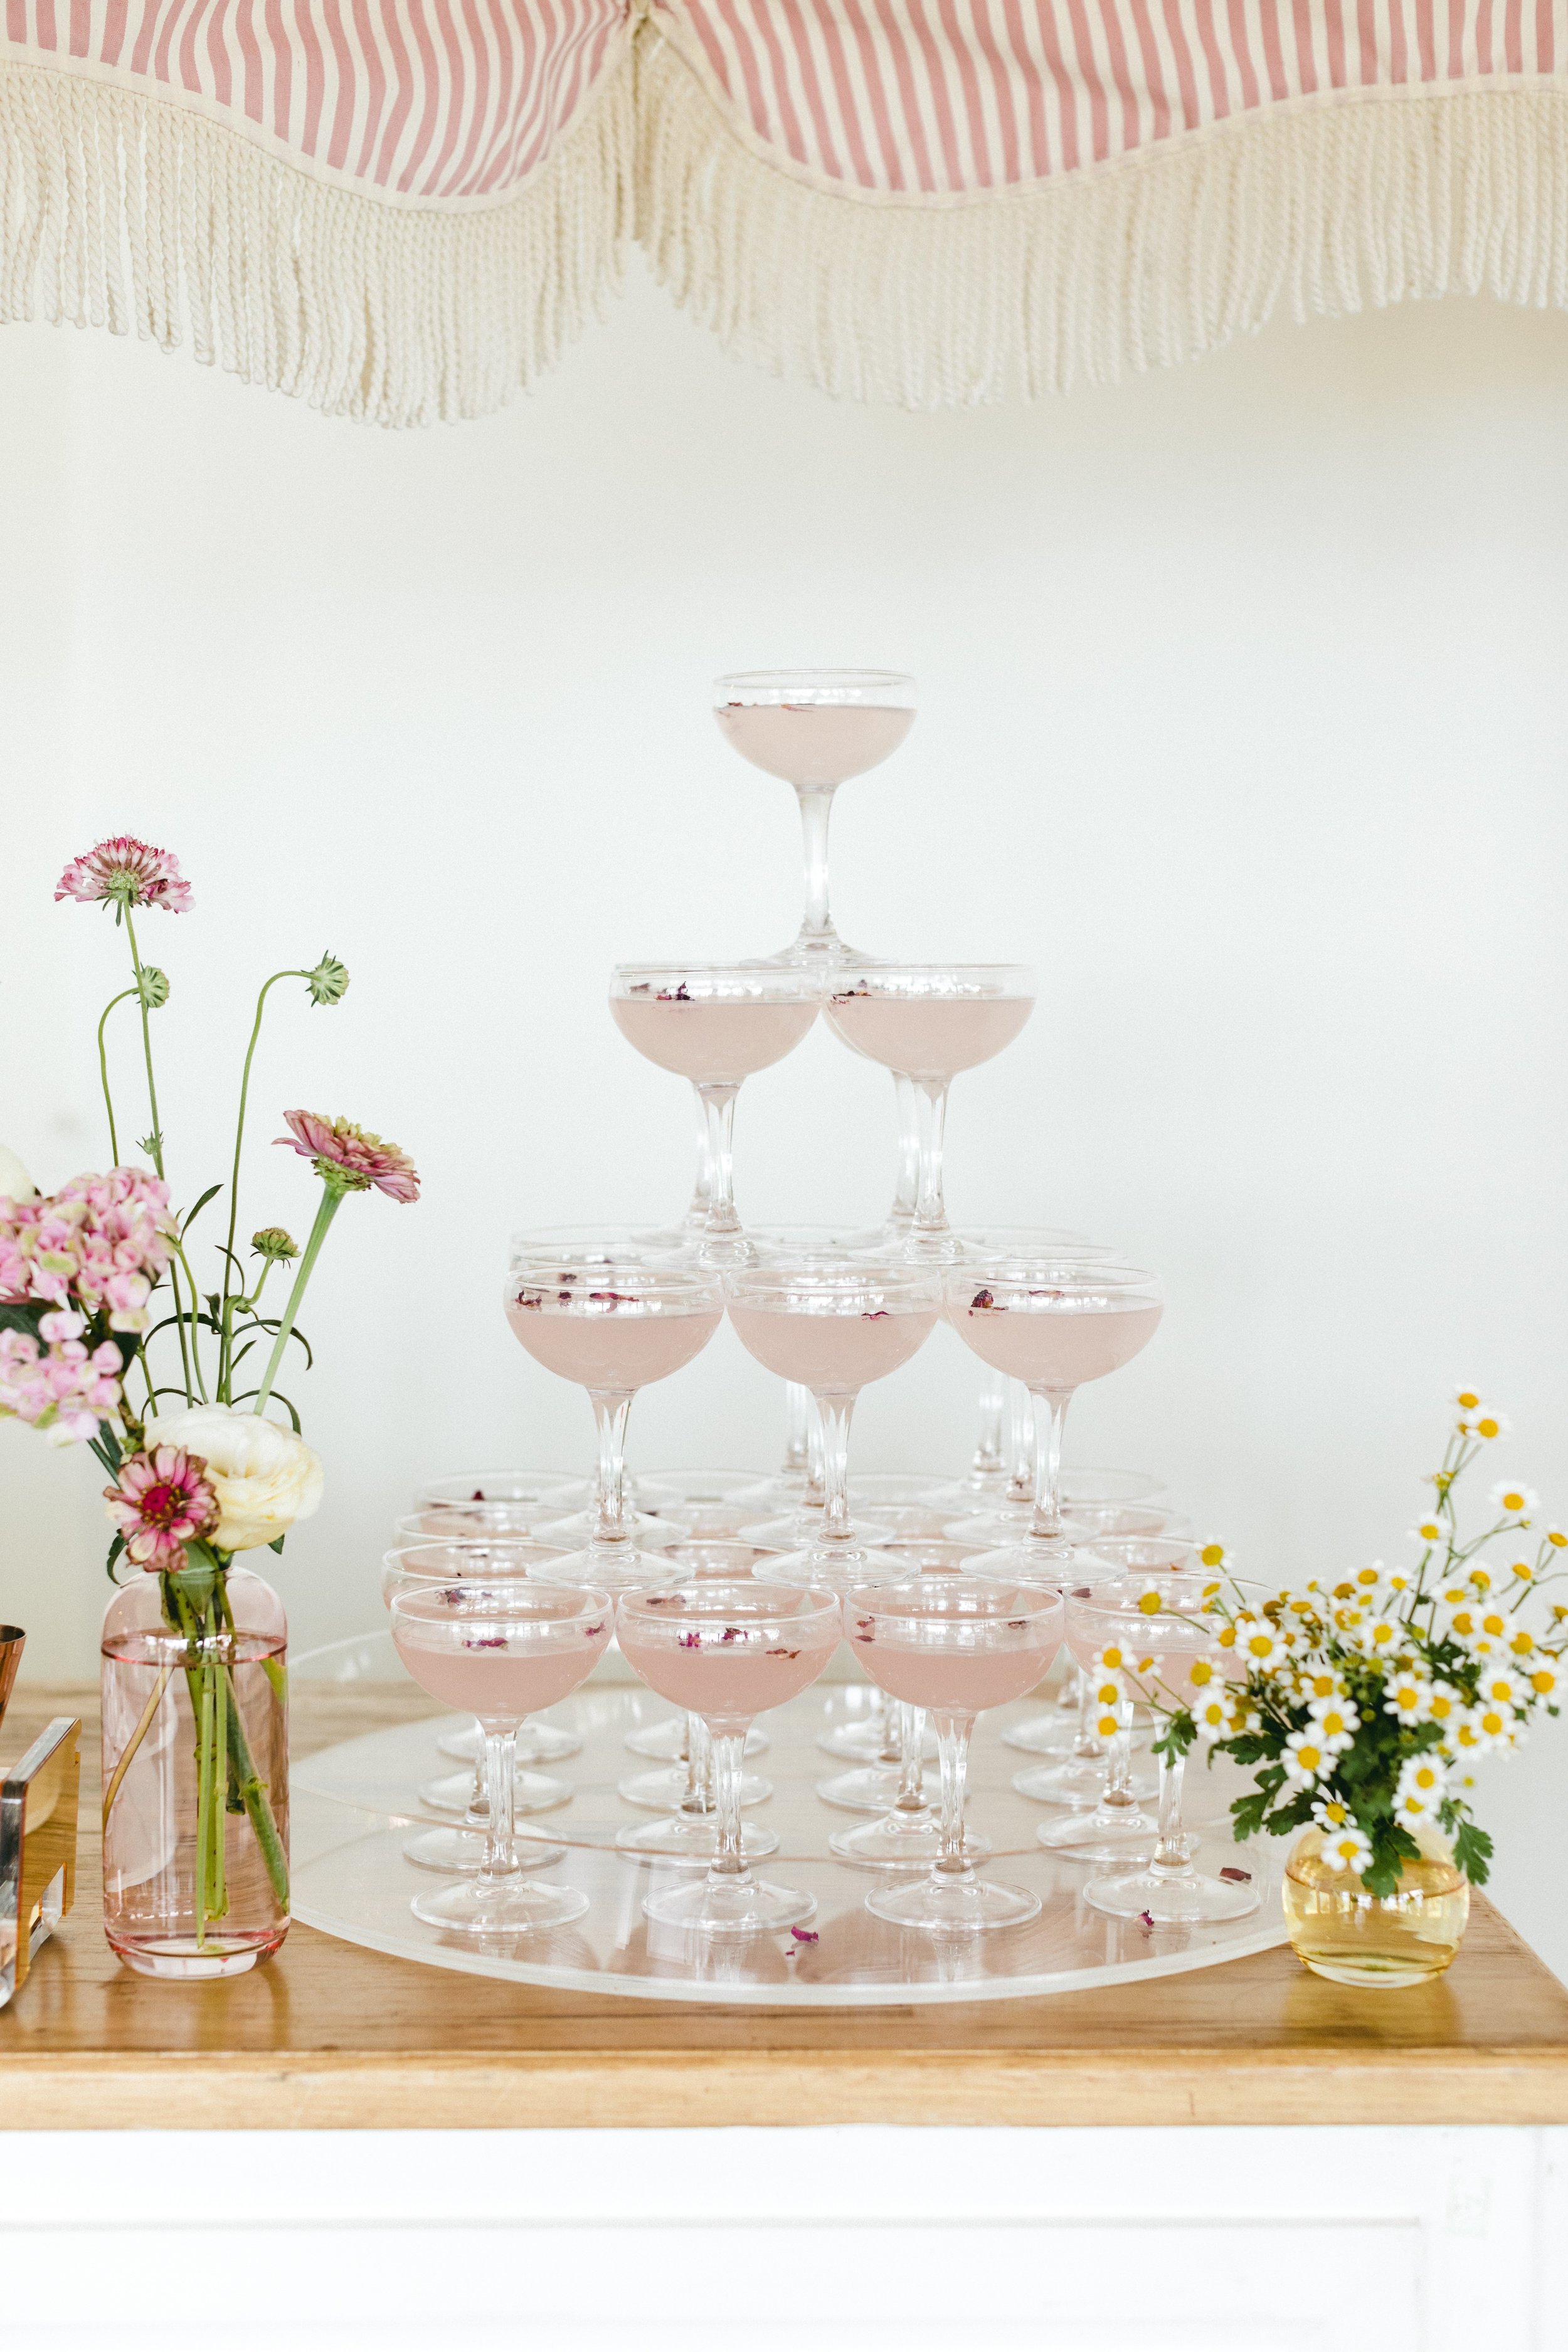 Champagne Tower Hire - Lavishly Serve Your Fizz!